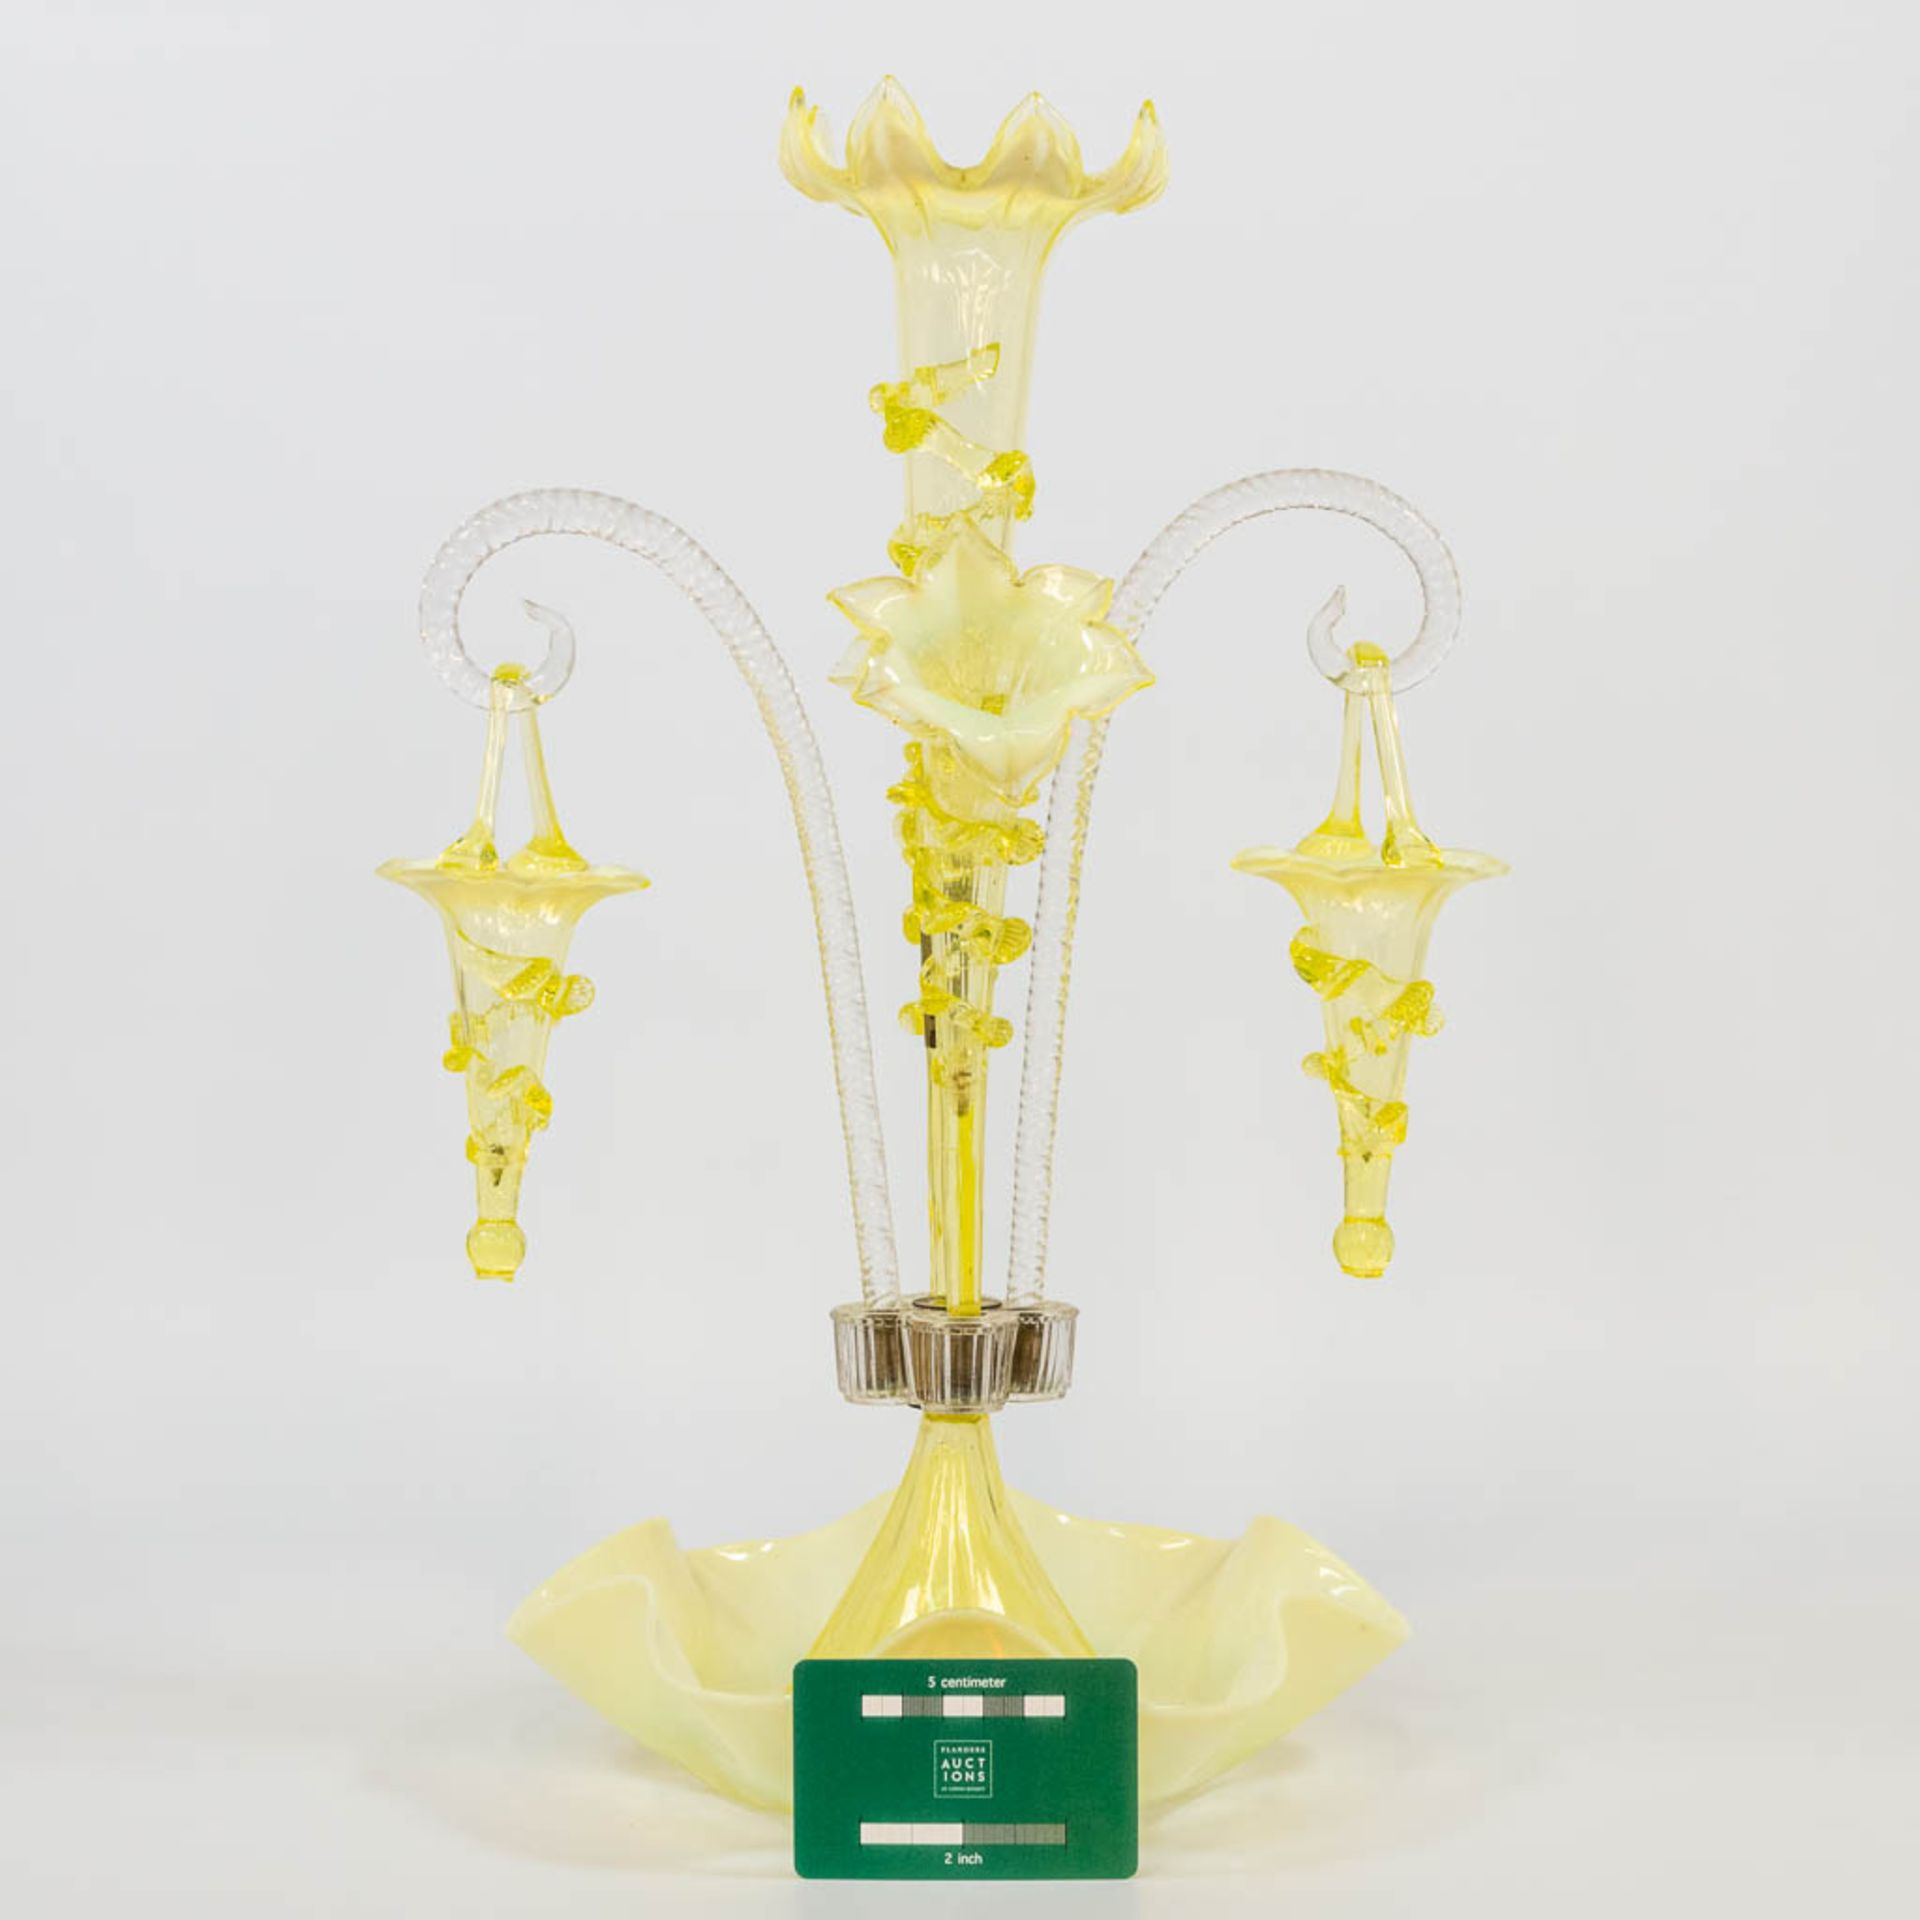 A yellow and clear glass table centrepiece pic-fleur, made in Murano, Italy. (25 x 28 x 45 cm) - Bild 2 aus 15